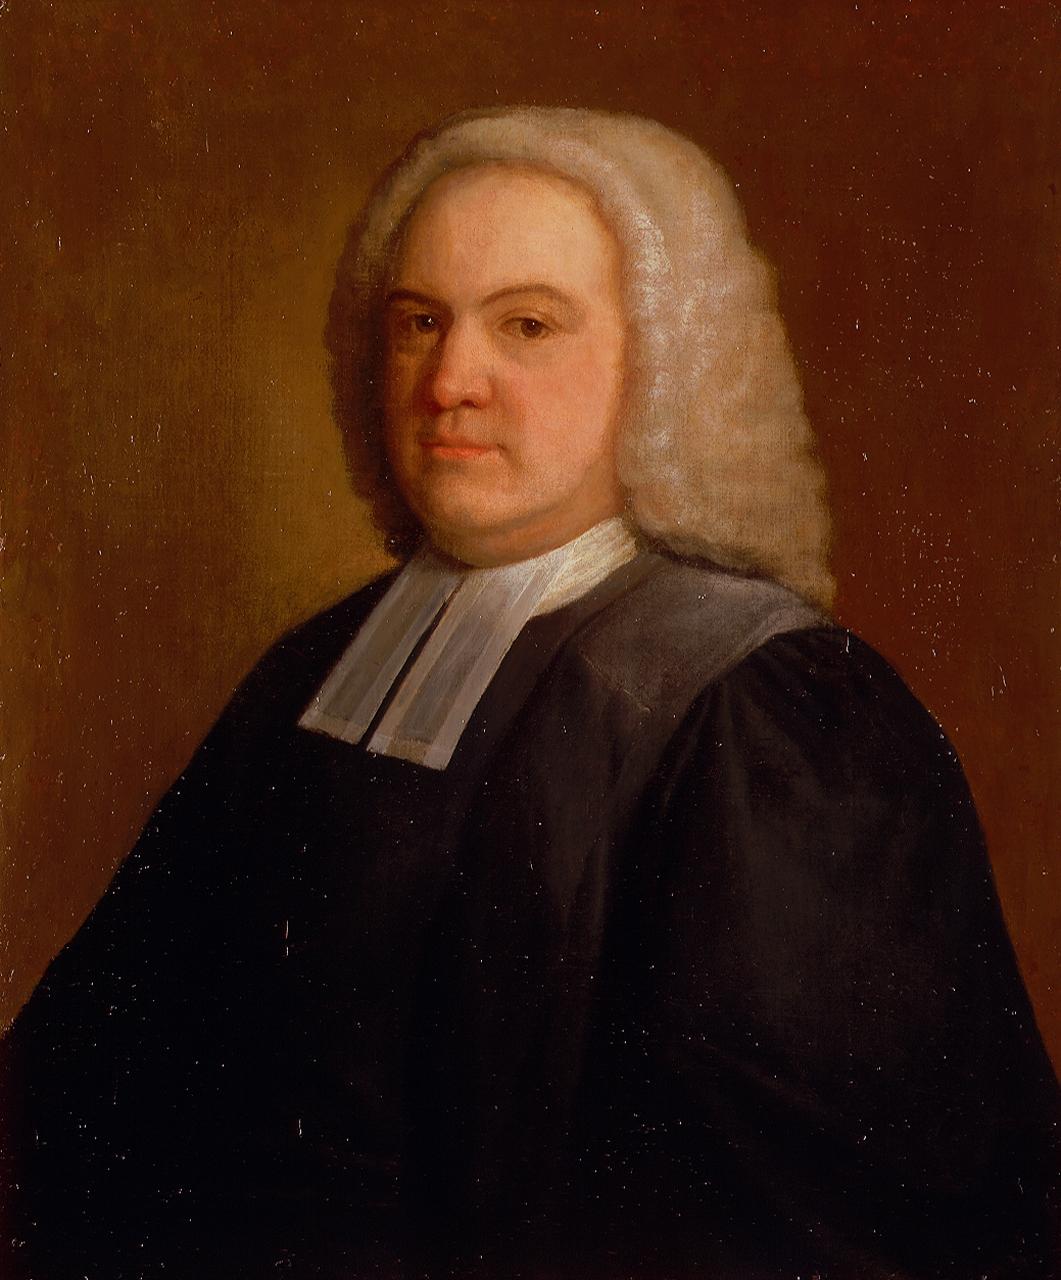 Painting of astronomer Nathaniel Bliss